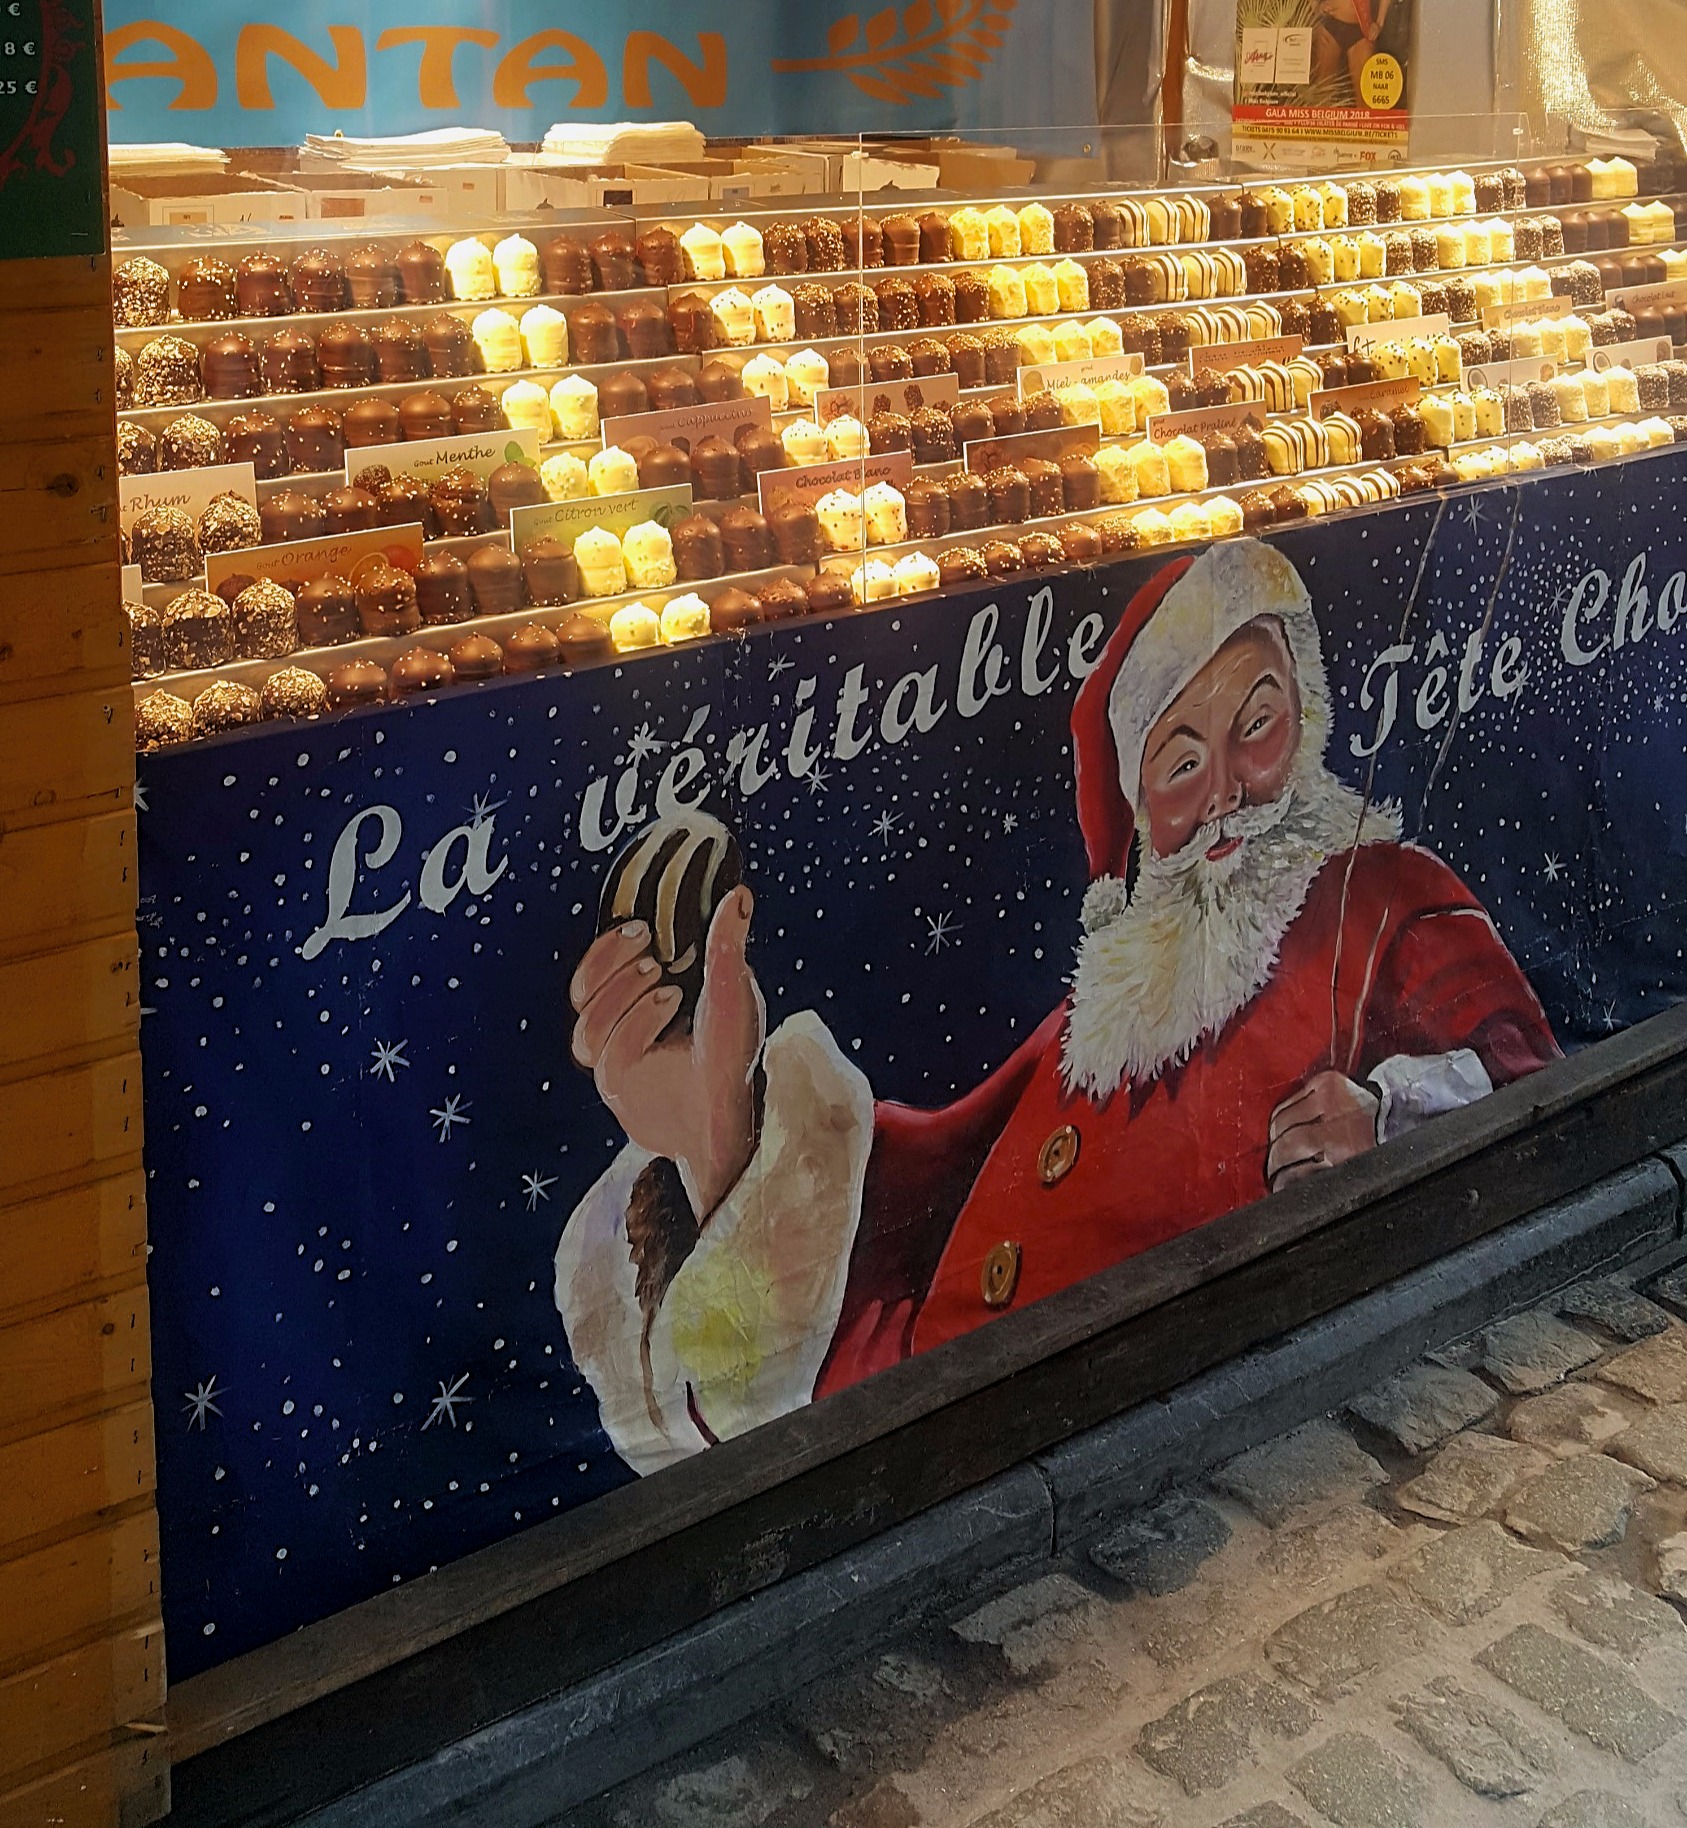 Chocolate covered marshmallows or Tete de Choco at the Brussels Christmas markets.